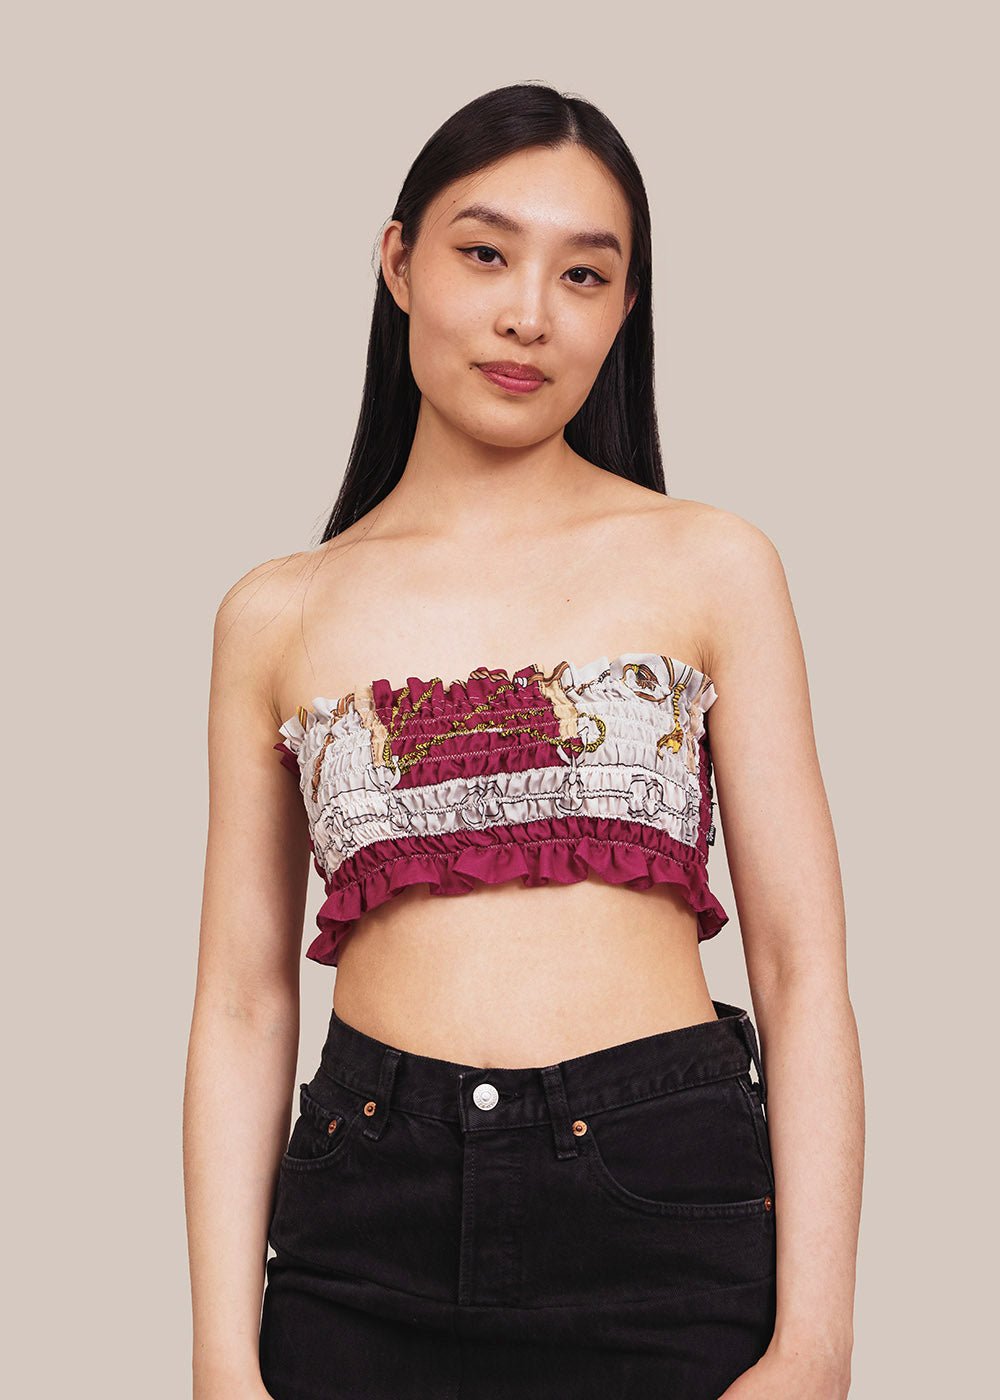 Two-Piece Sheer Drawstring Cropped Shirt - AIR SPACE